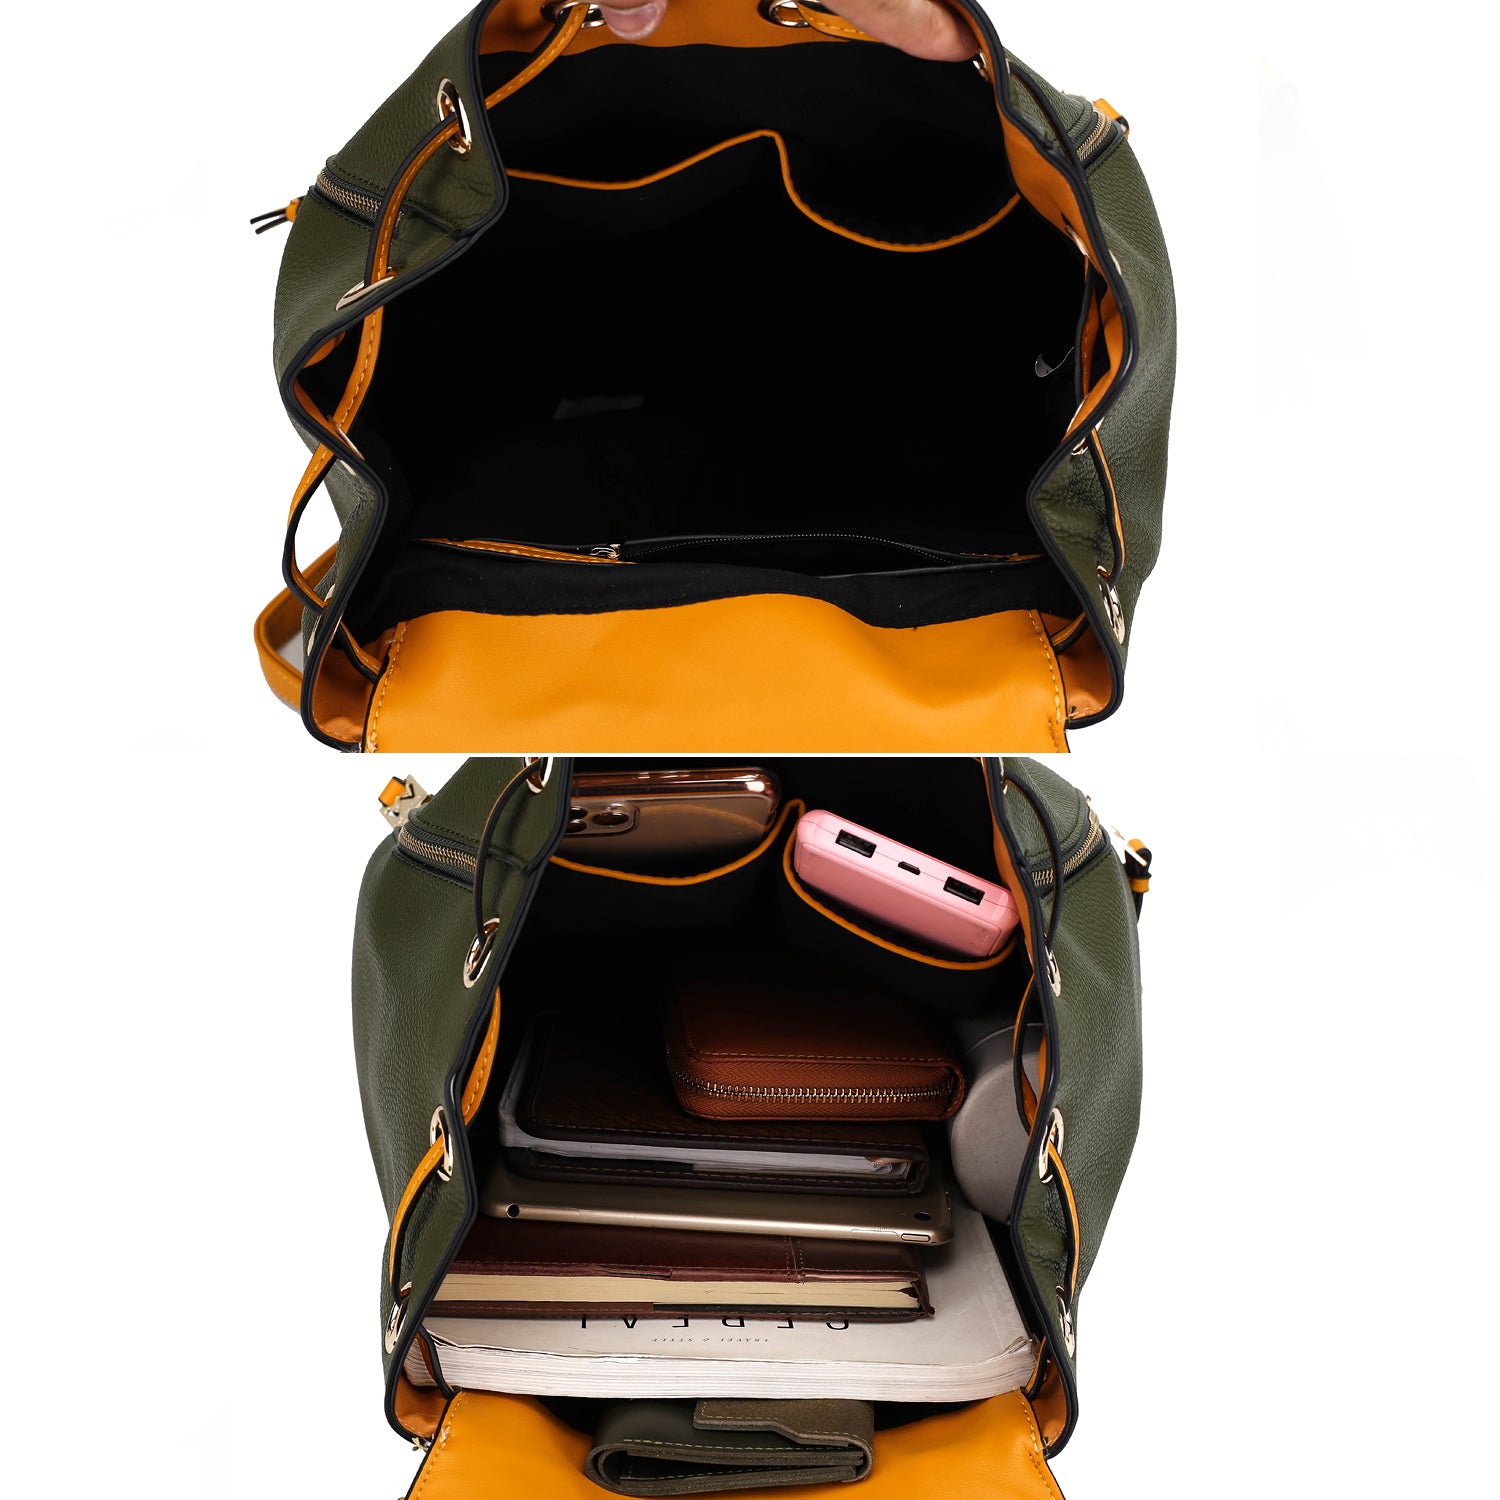 Two pictures of the Pink Orpheus Kimberly Backpack Vegan Leather Women showcasing its spacious storage capacity for a laptop and cell phone.